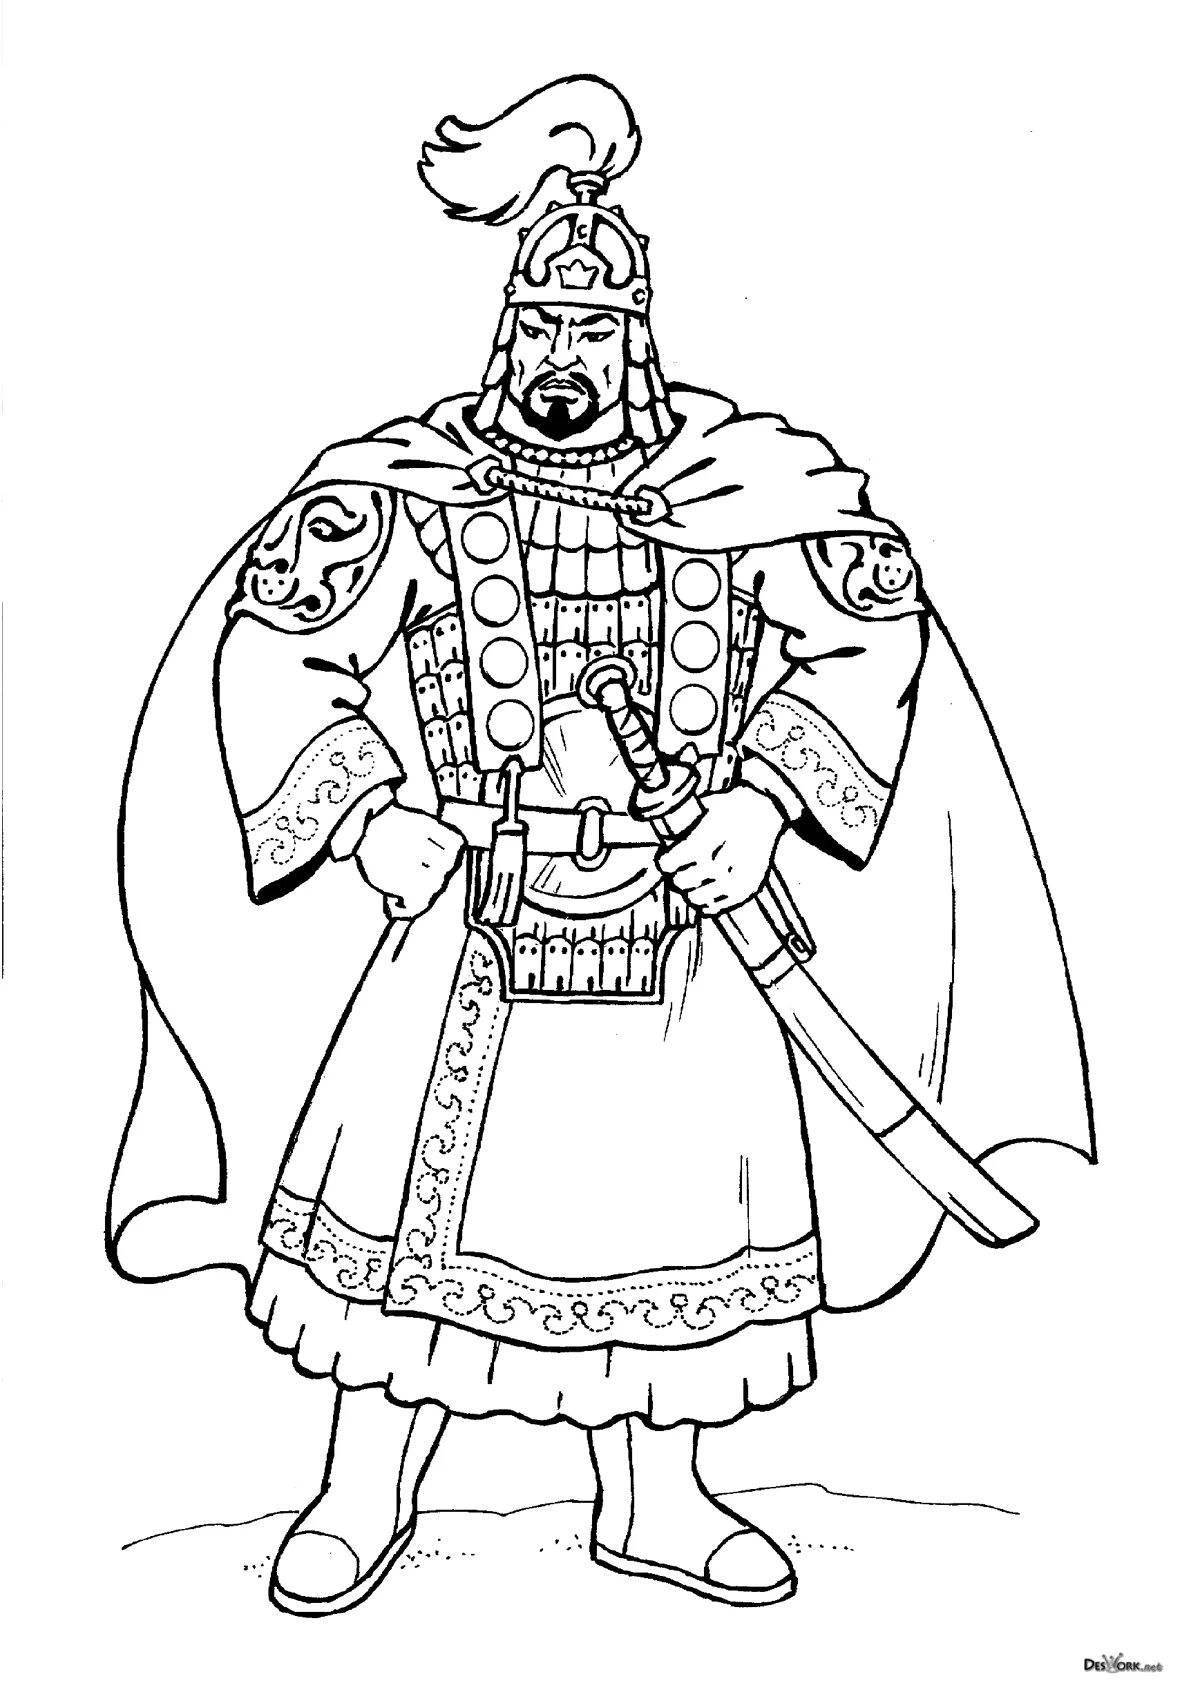 Coloring page luxury mongolian warrior